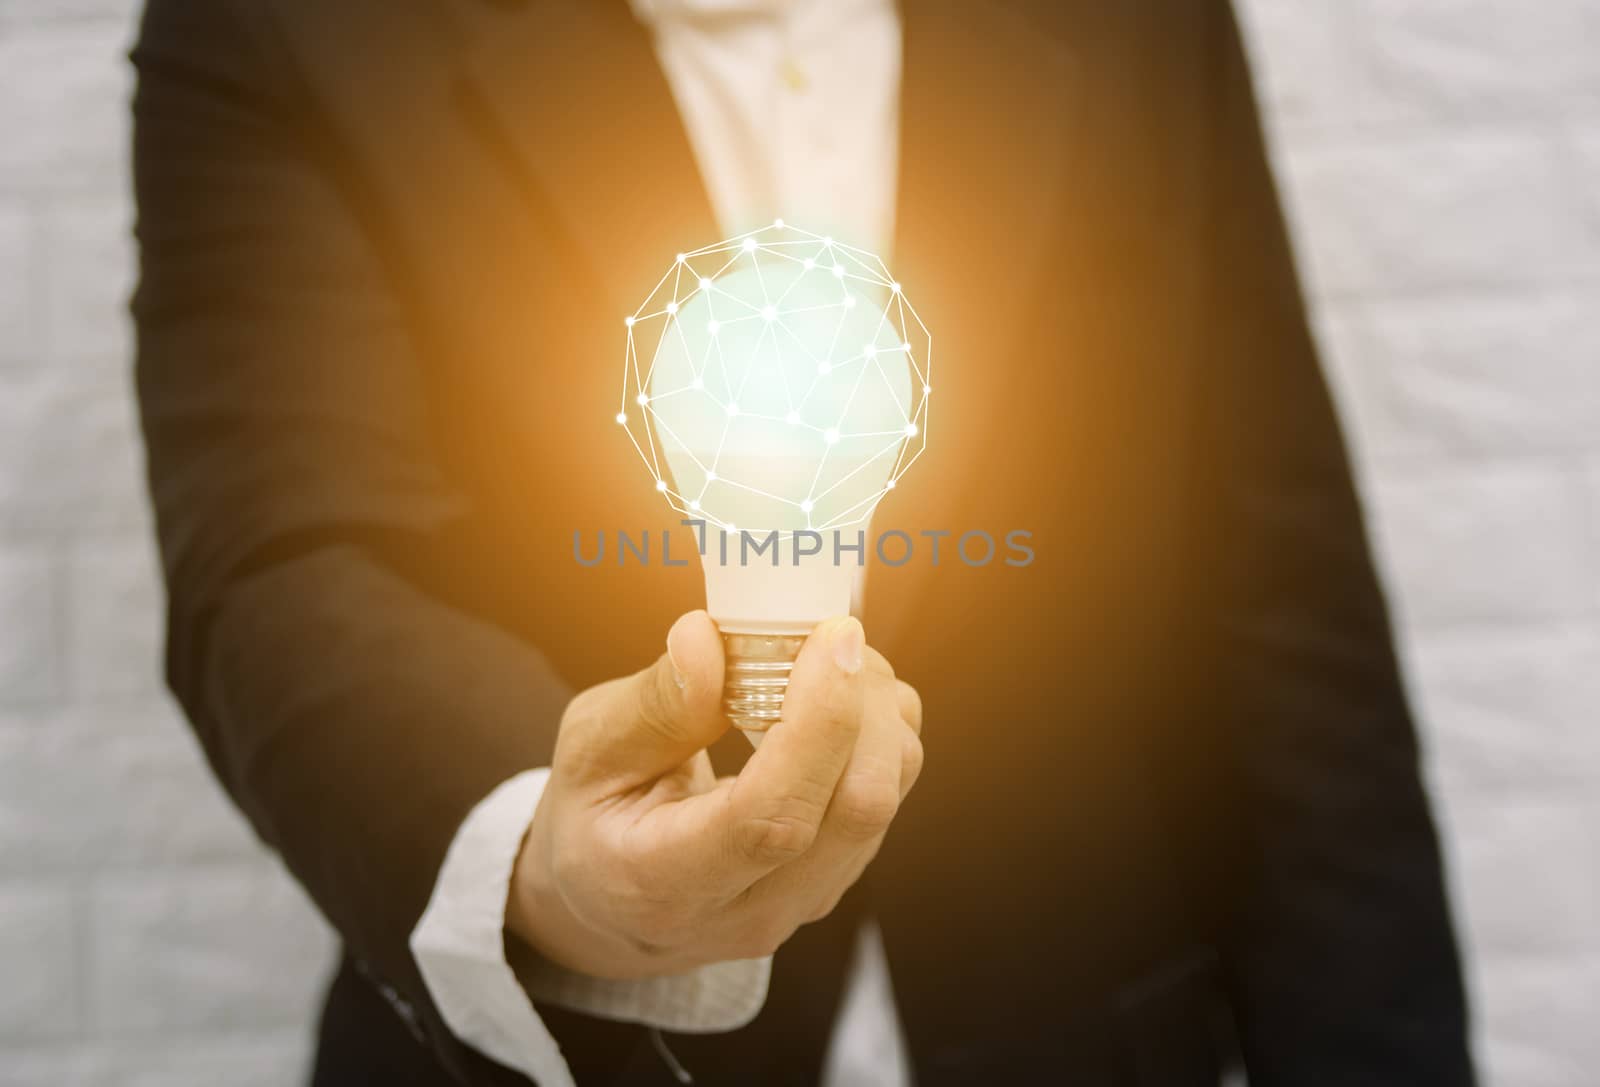 Light bulb new ideas with innovative technology solution concepts hands of the businessman. by sompongtom